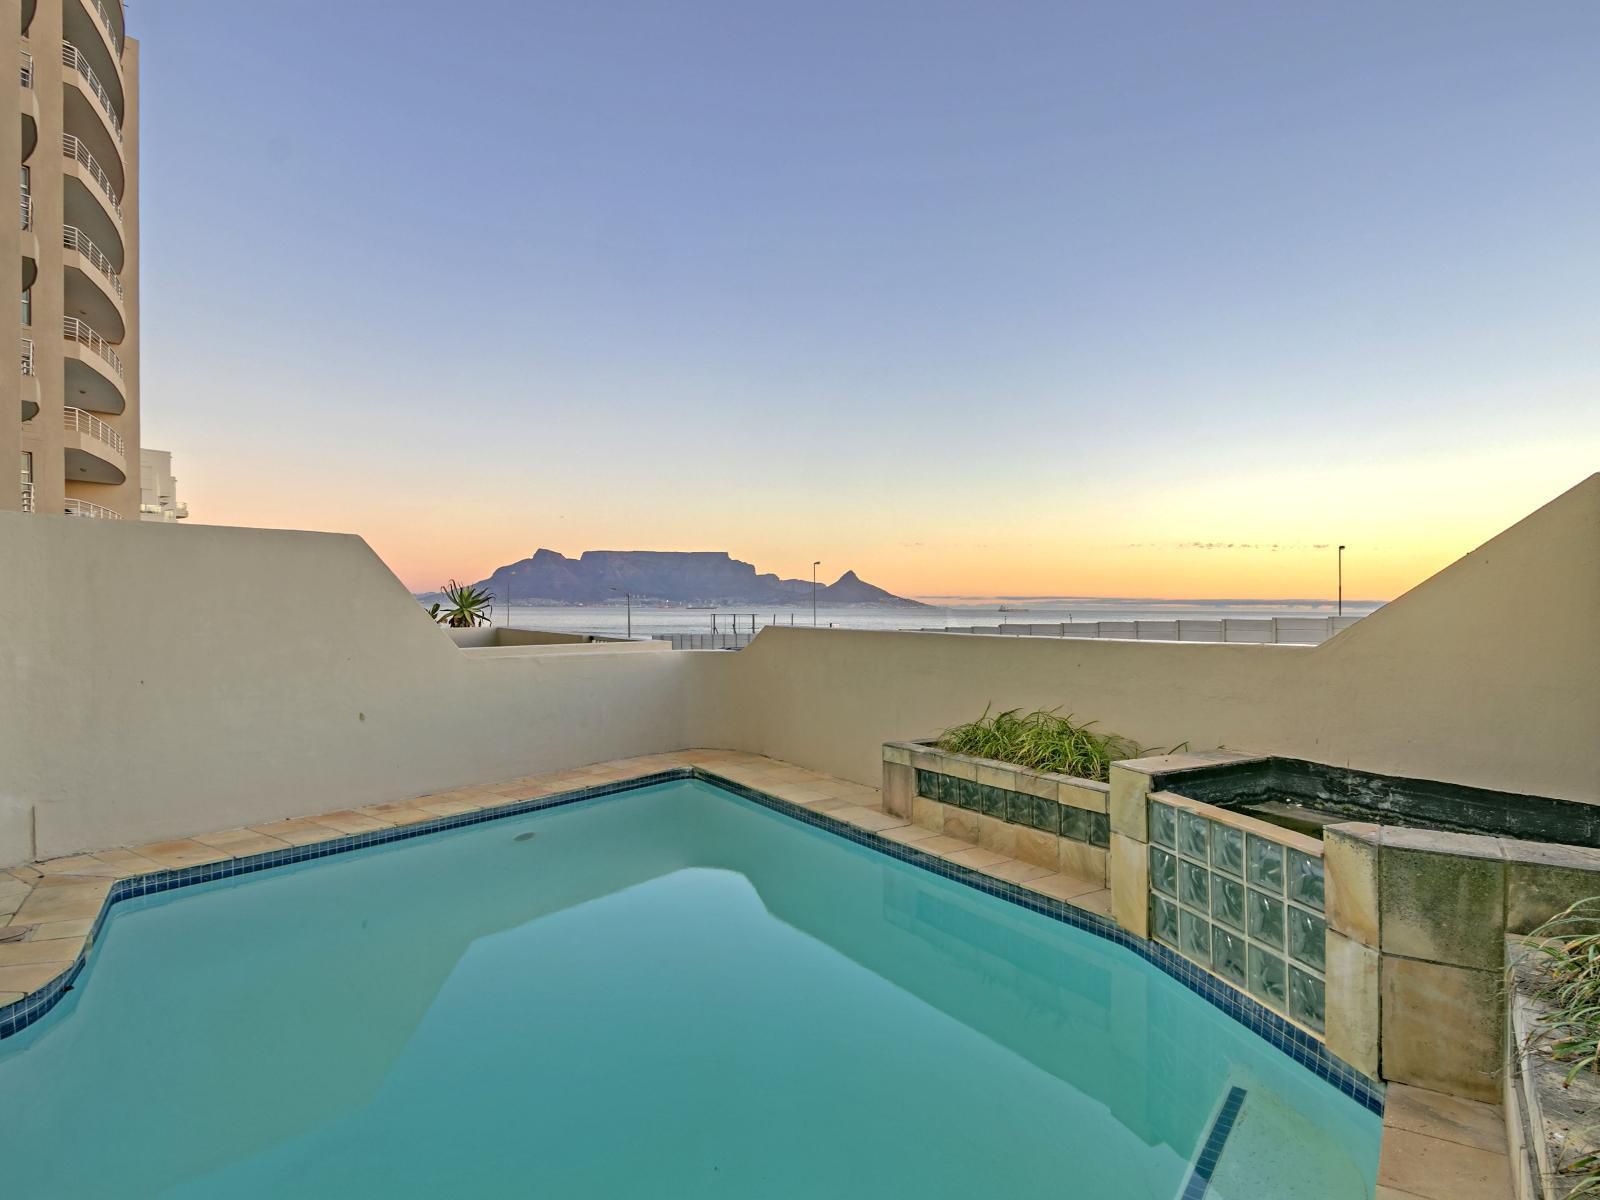 Kite View The Bay By Hostagents West Beach Blouberg Western Cape South Africa Complementary Colors, Swimming Pool